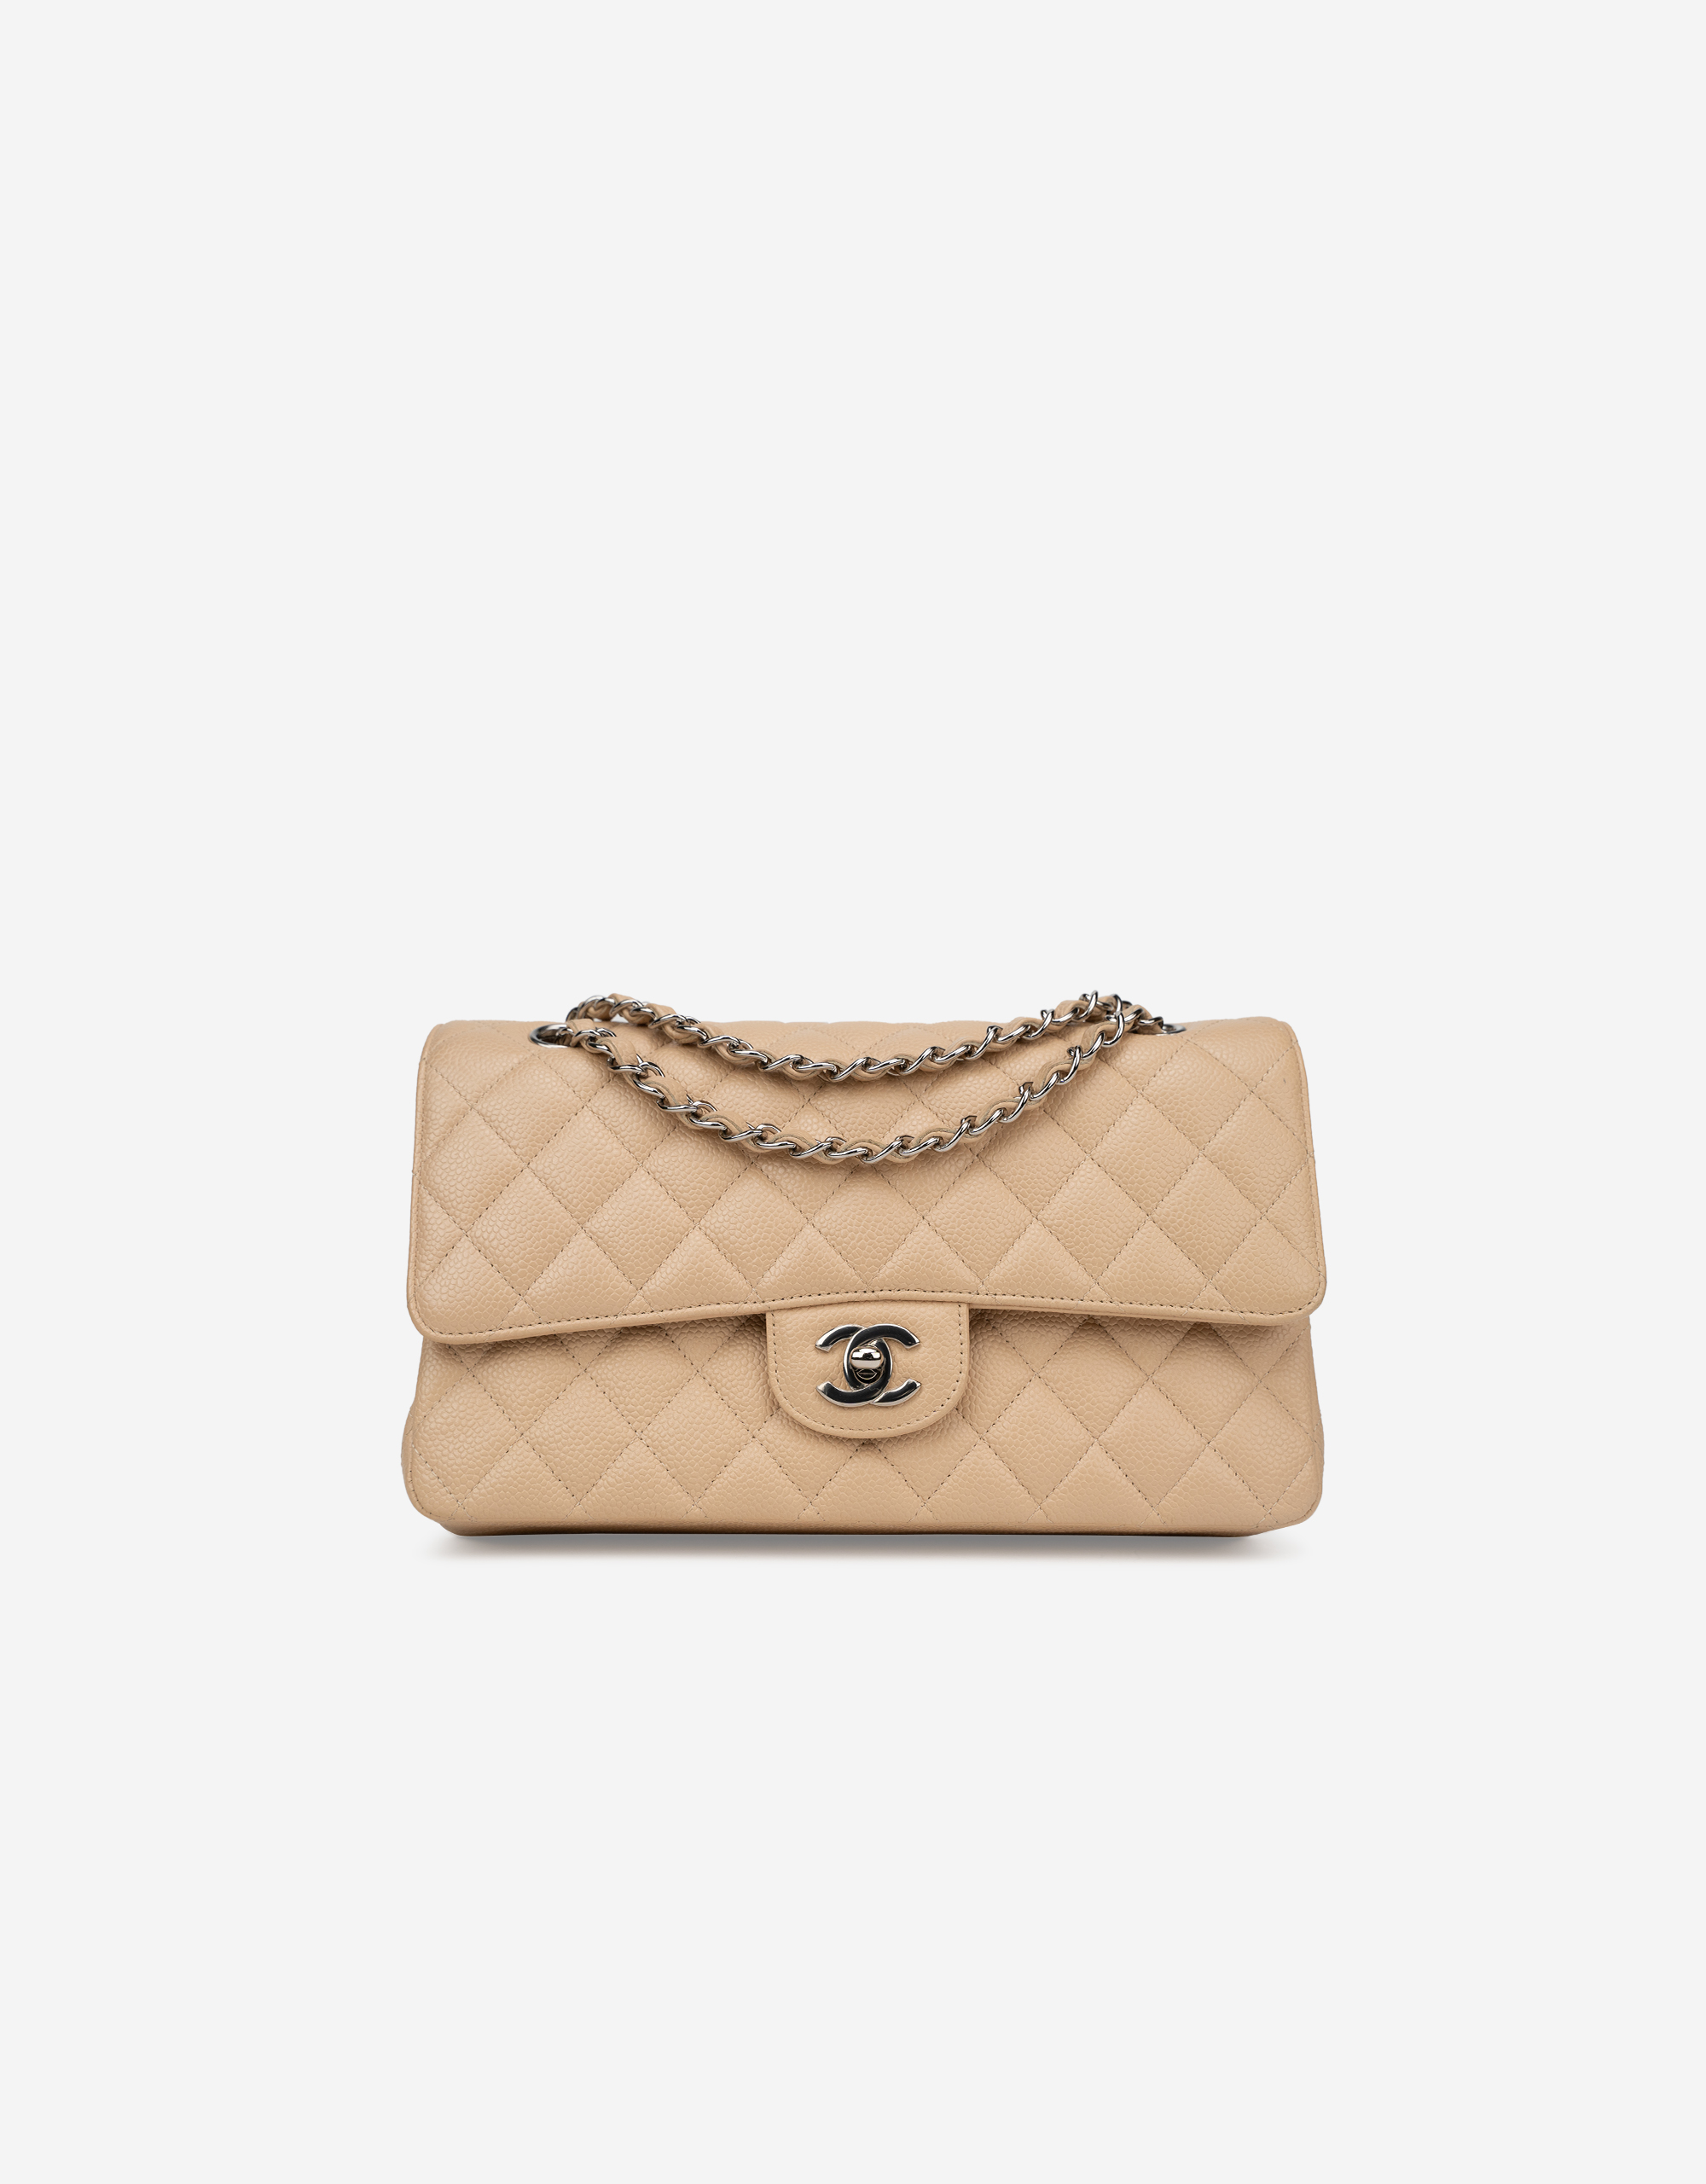 Chanel Copper Iridescent Quilted Caviar Leather Classic Jumbo